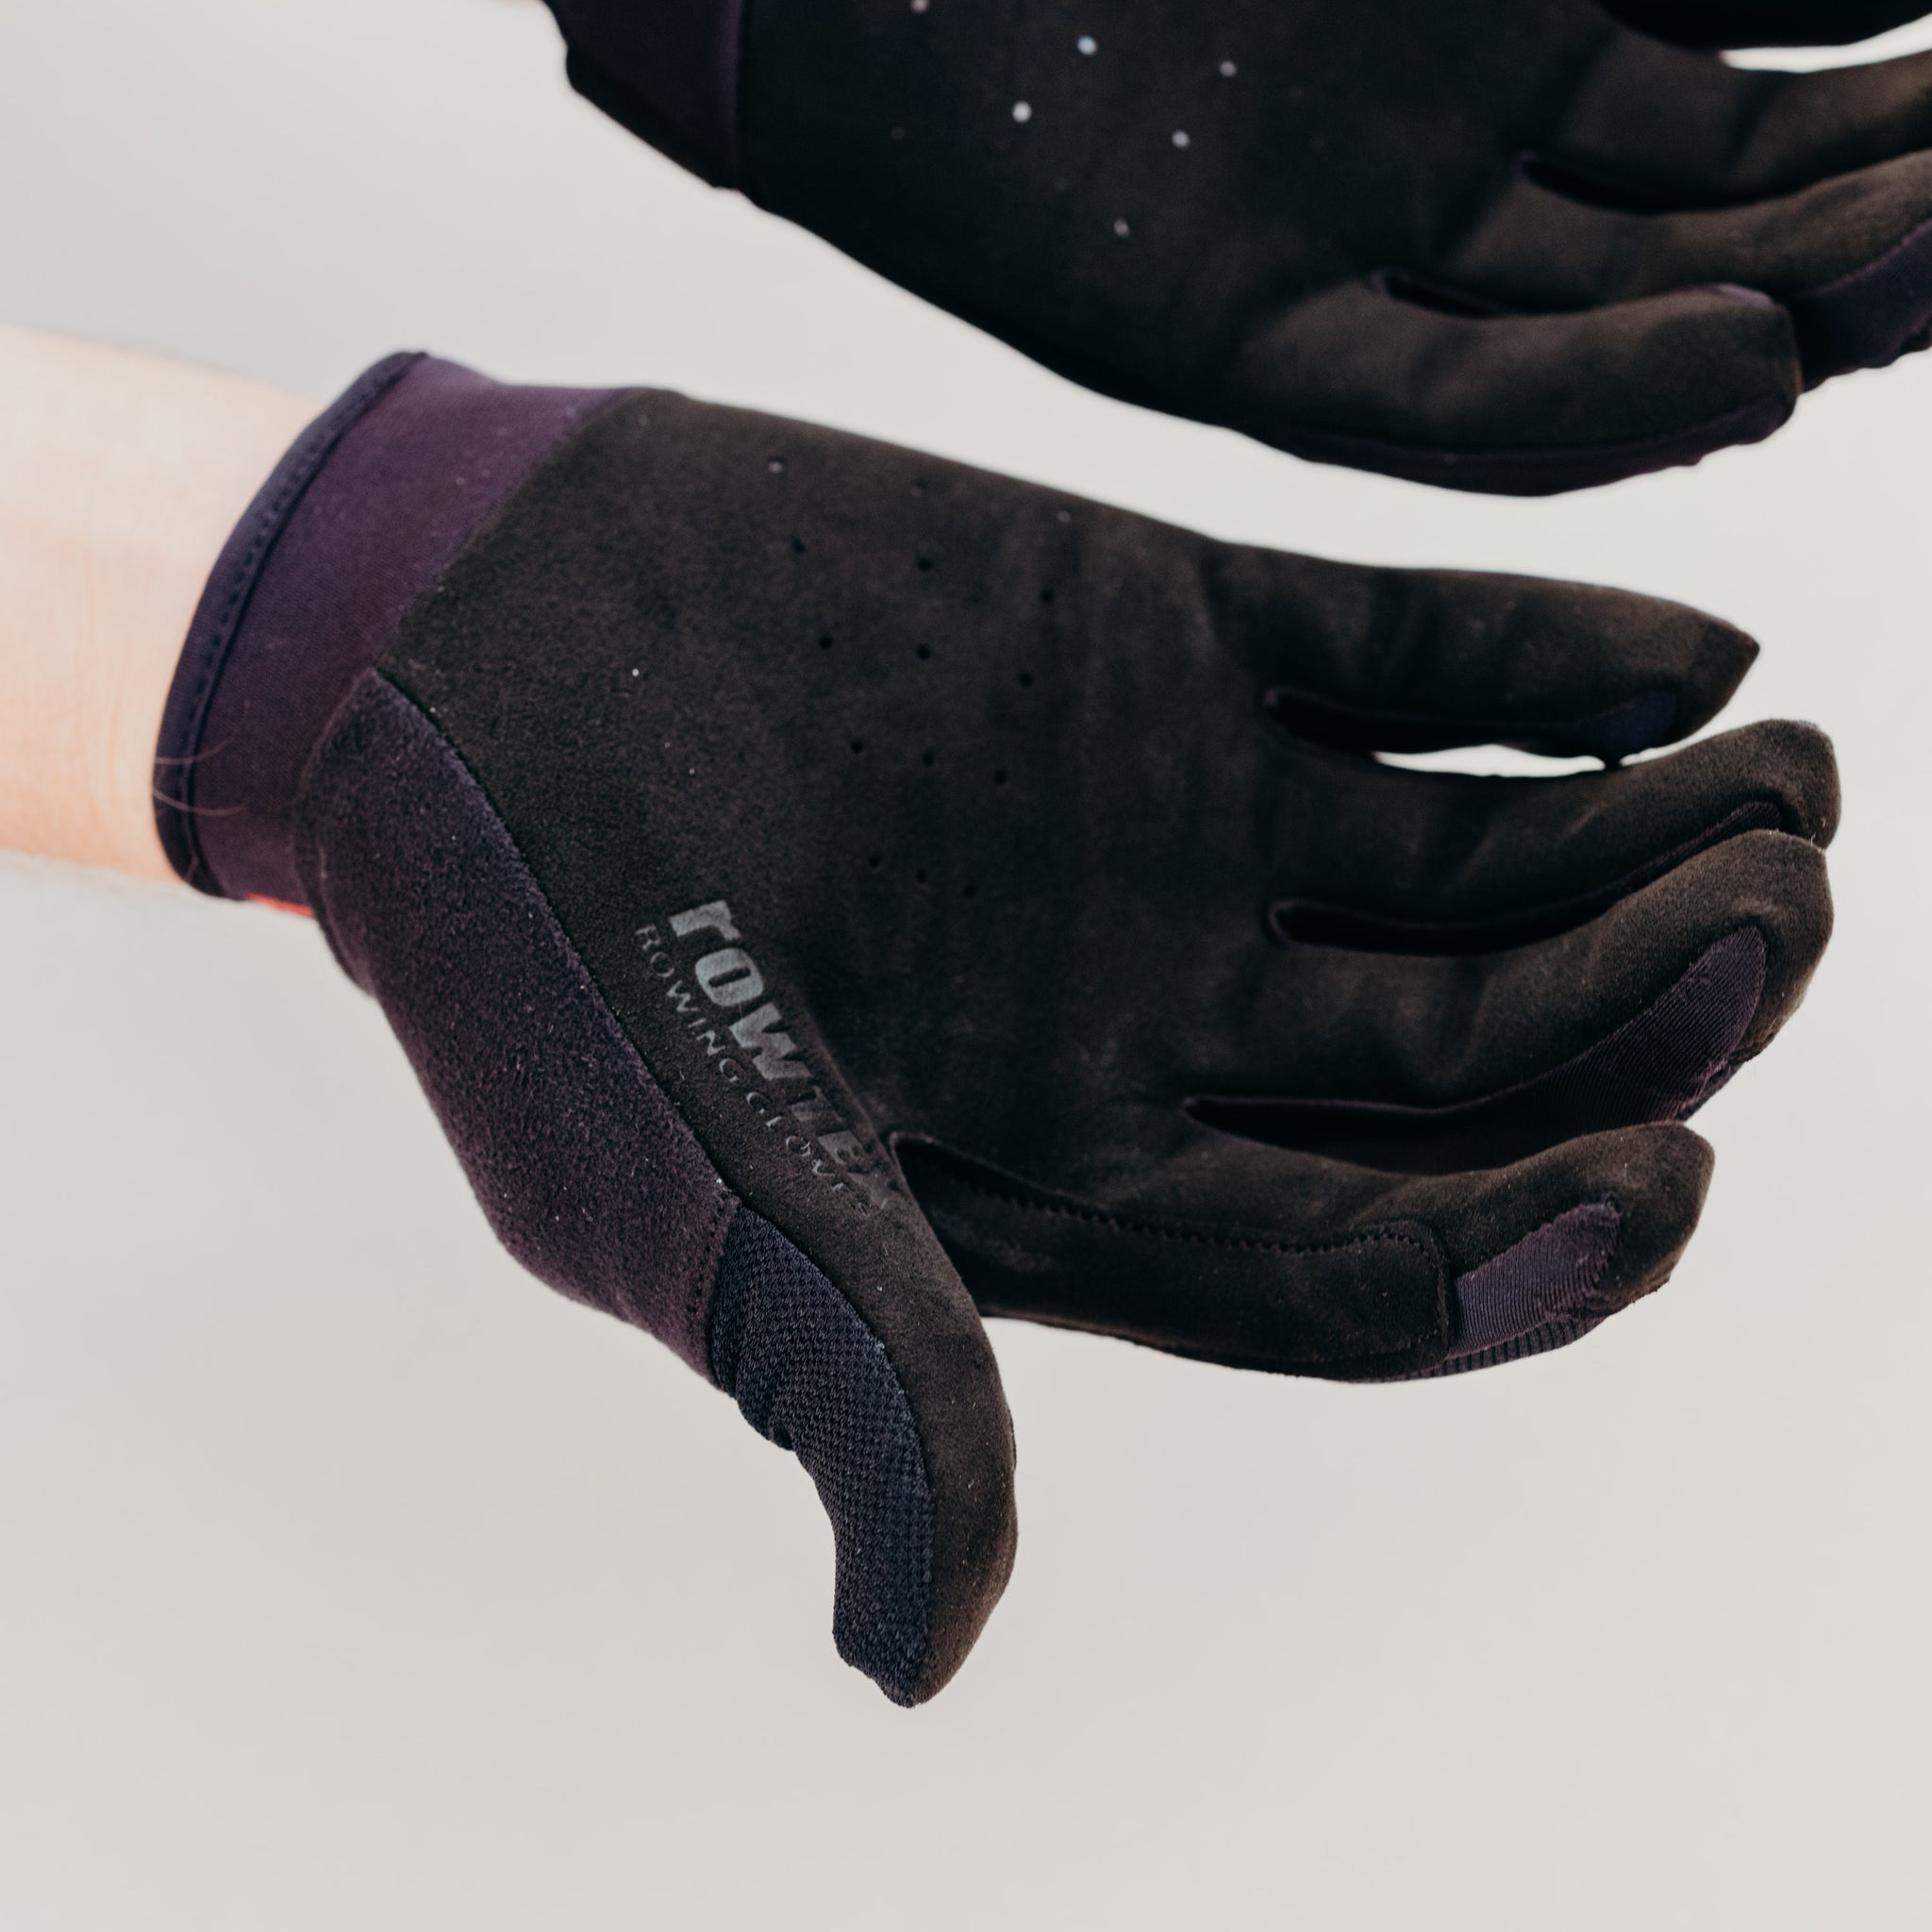 Rowing Gloves, Light Protection - LP